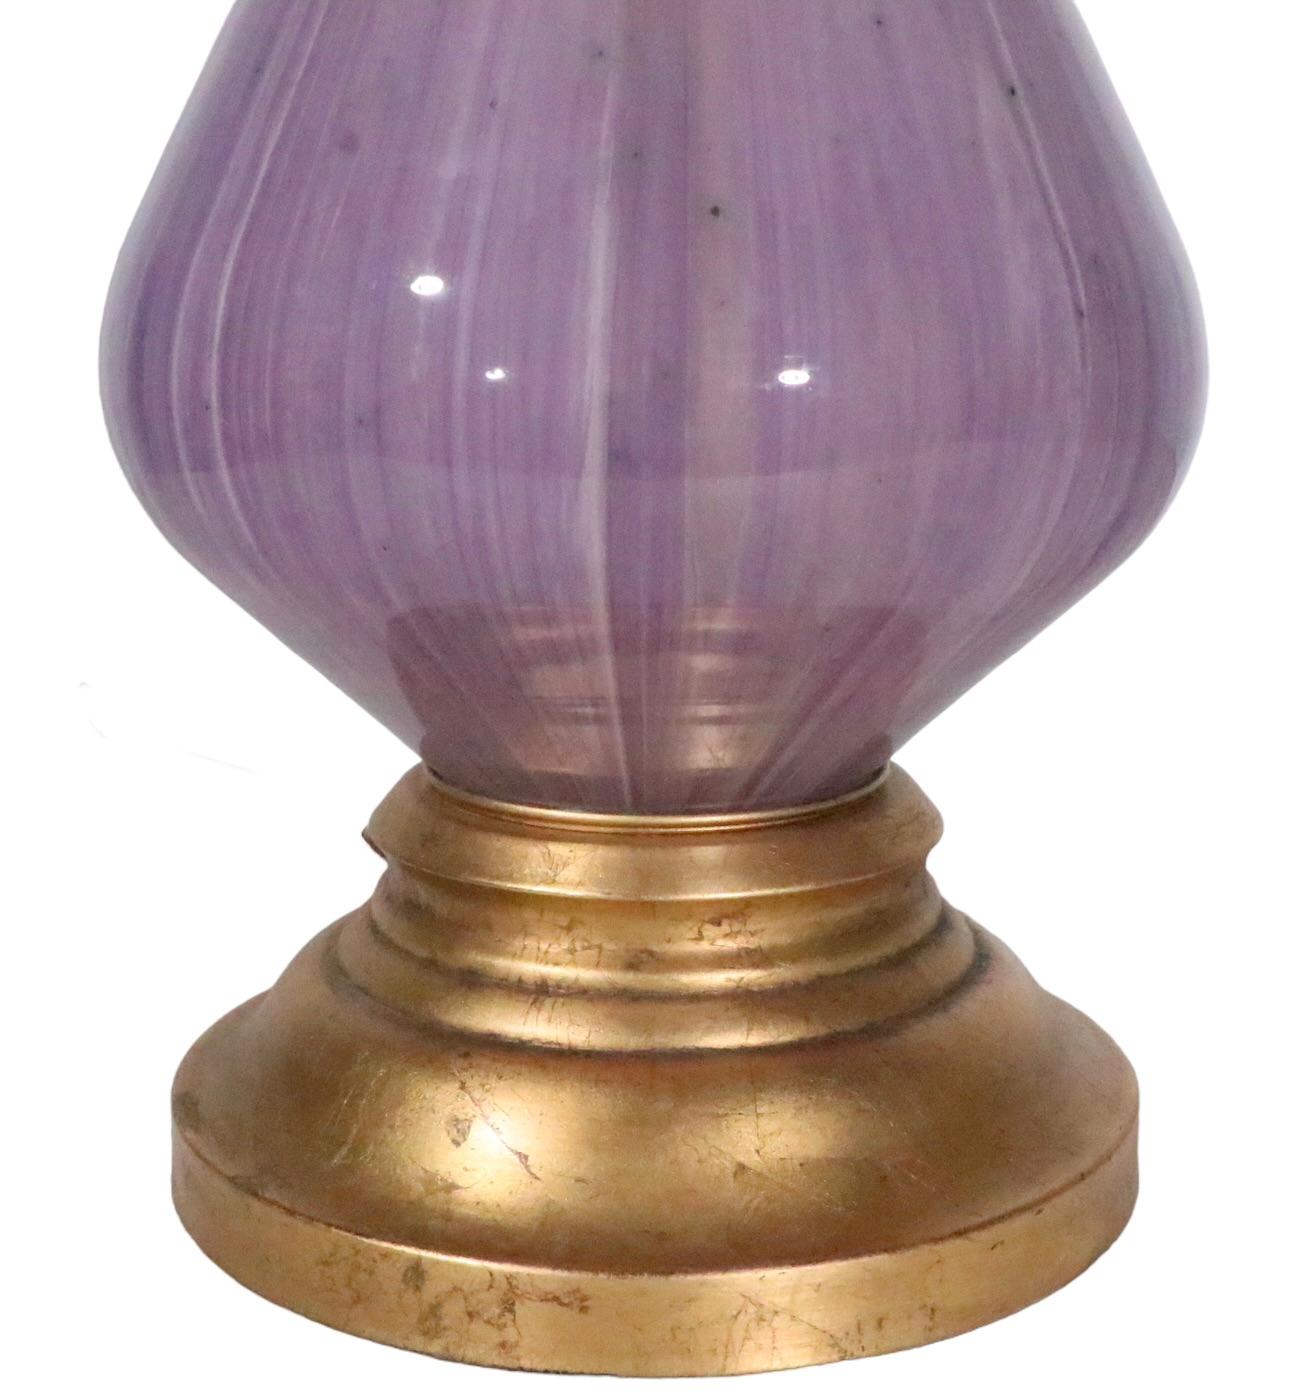 Large Murano Glass Table Lamp in Lavender Glass, circa 1950/1960s For Sale 3